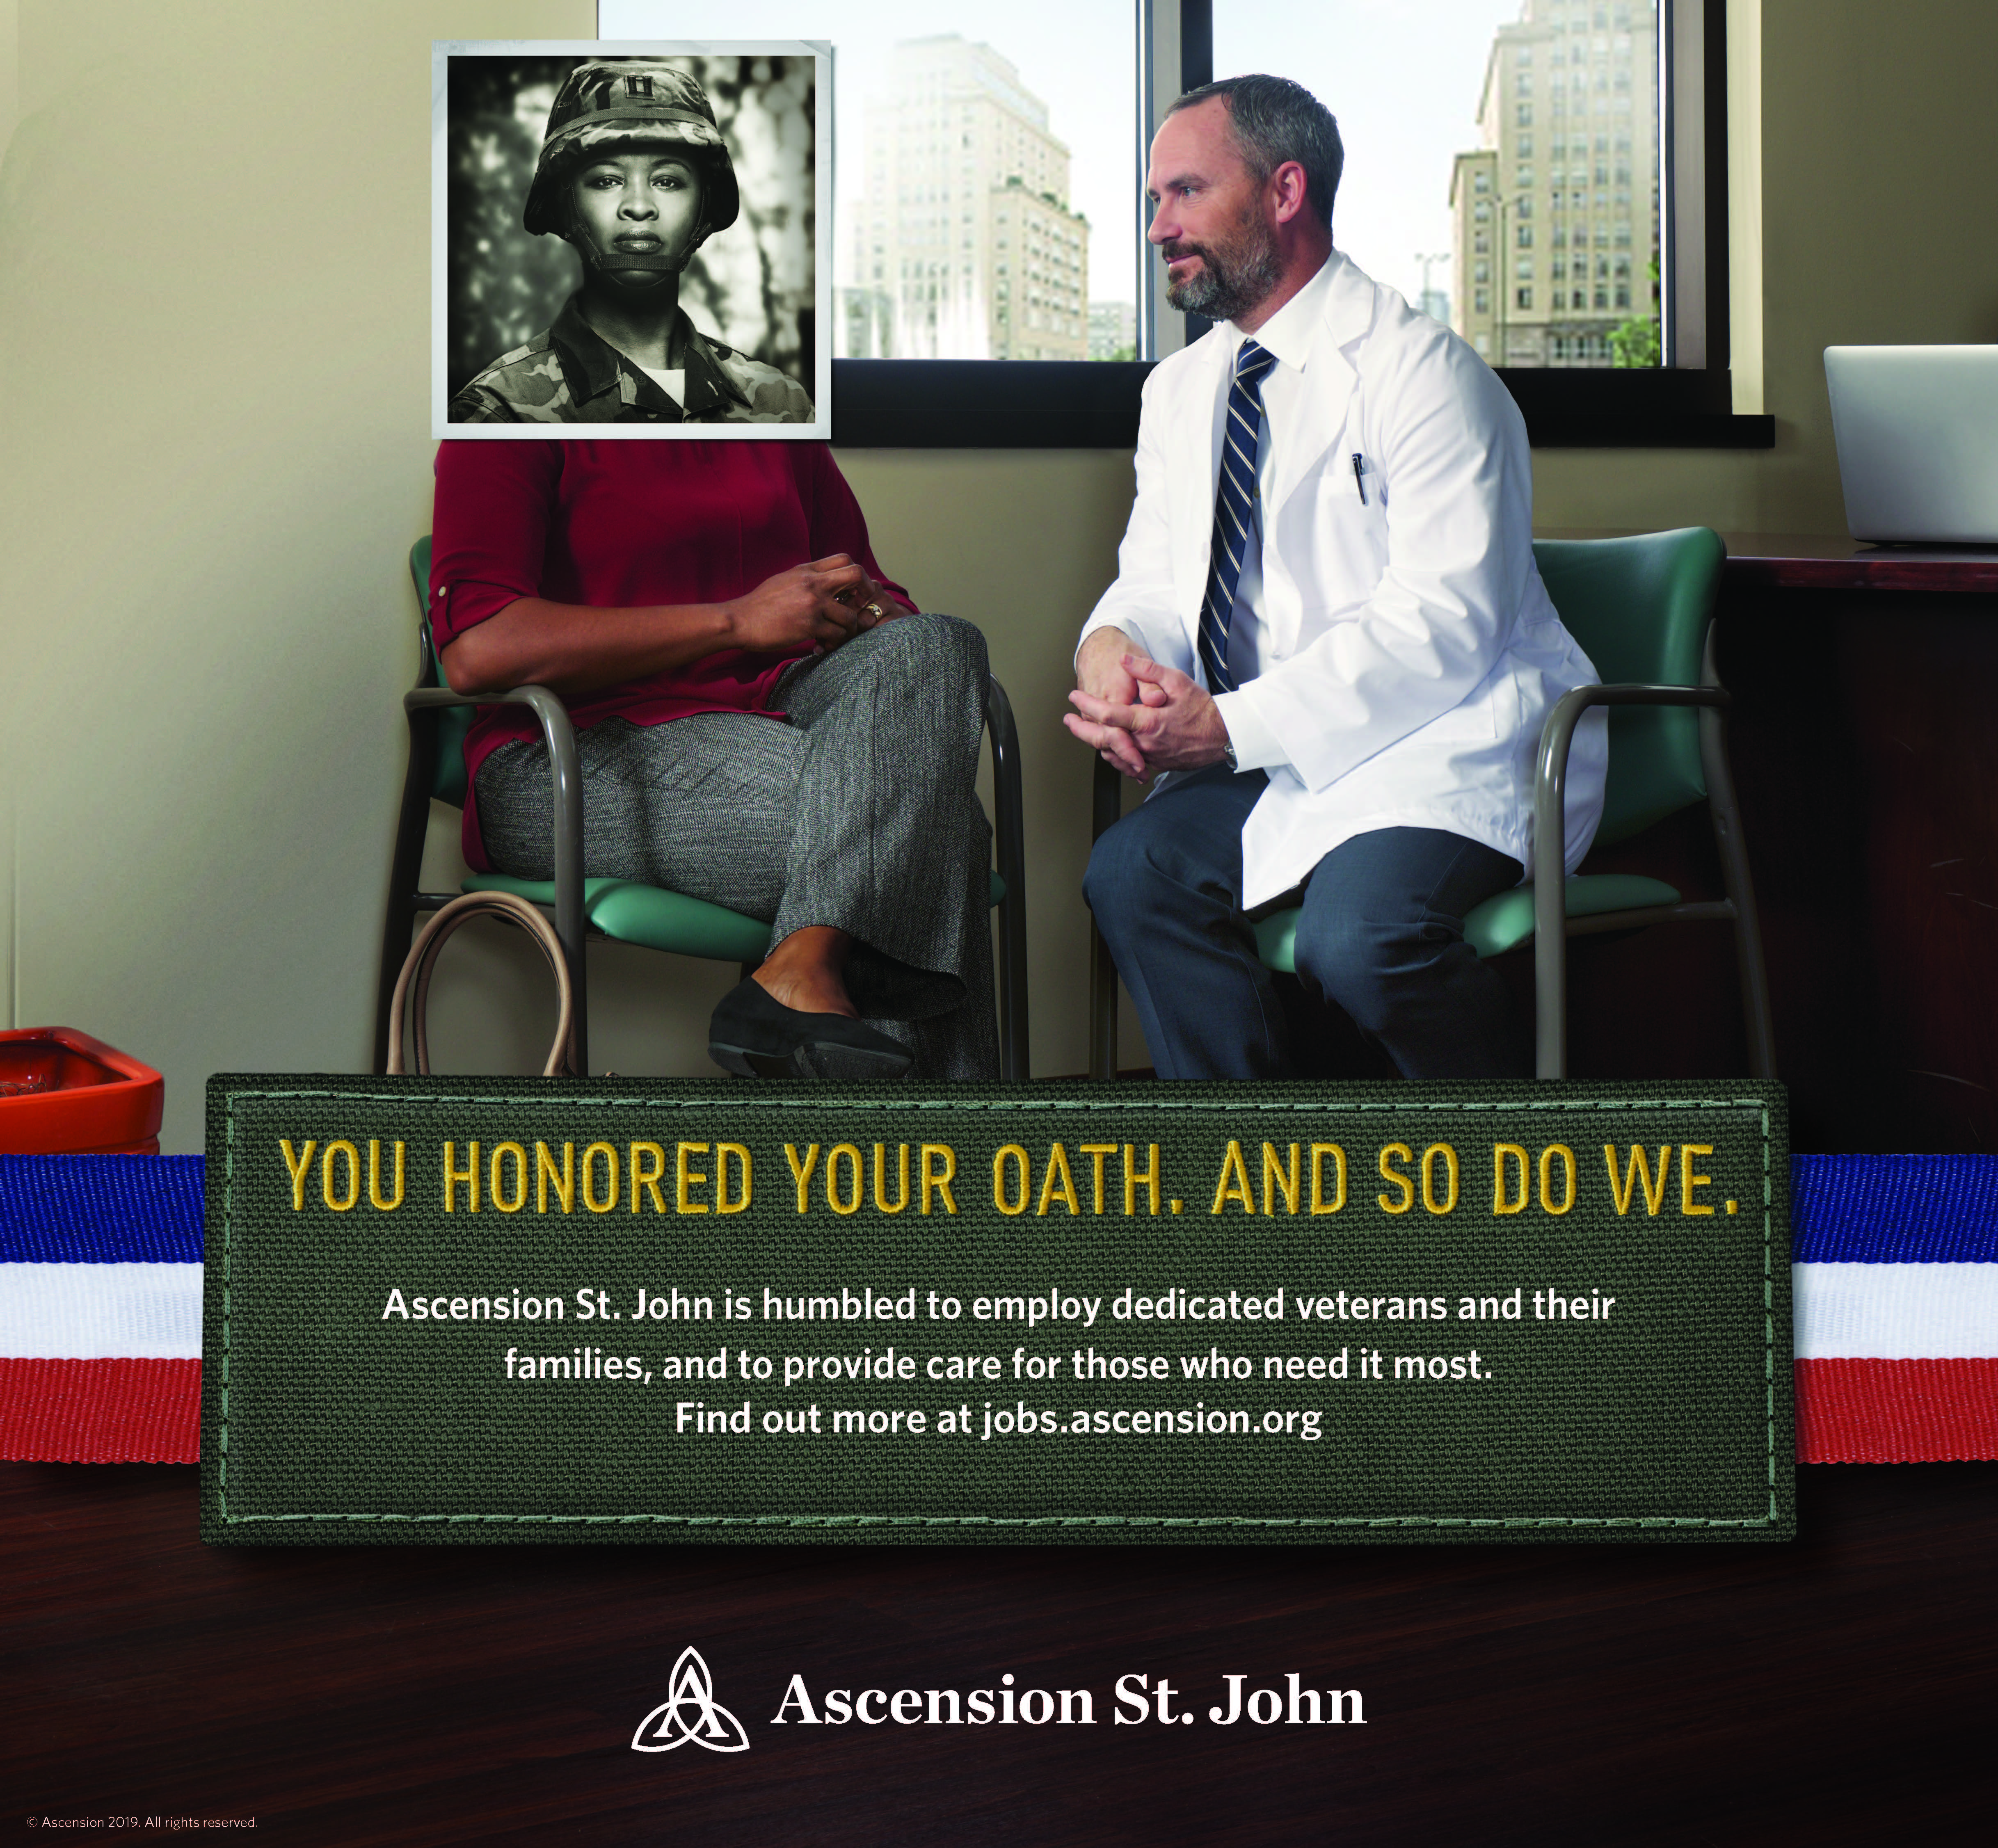 Ascension’s commitment to veterans extends to patients and associates